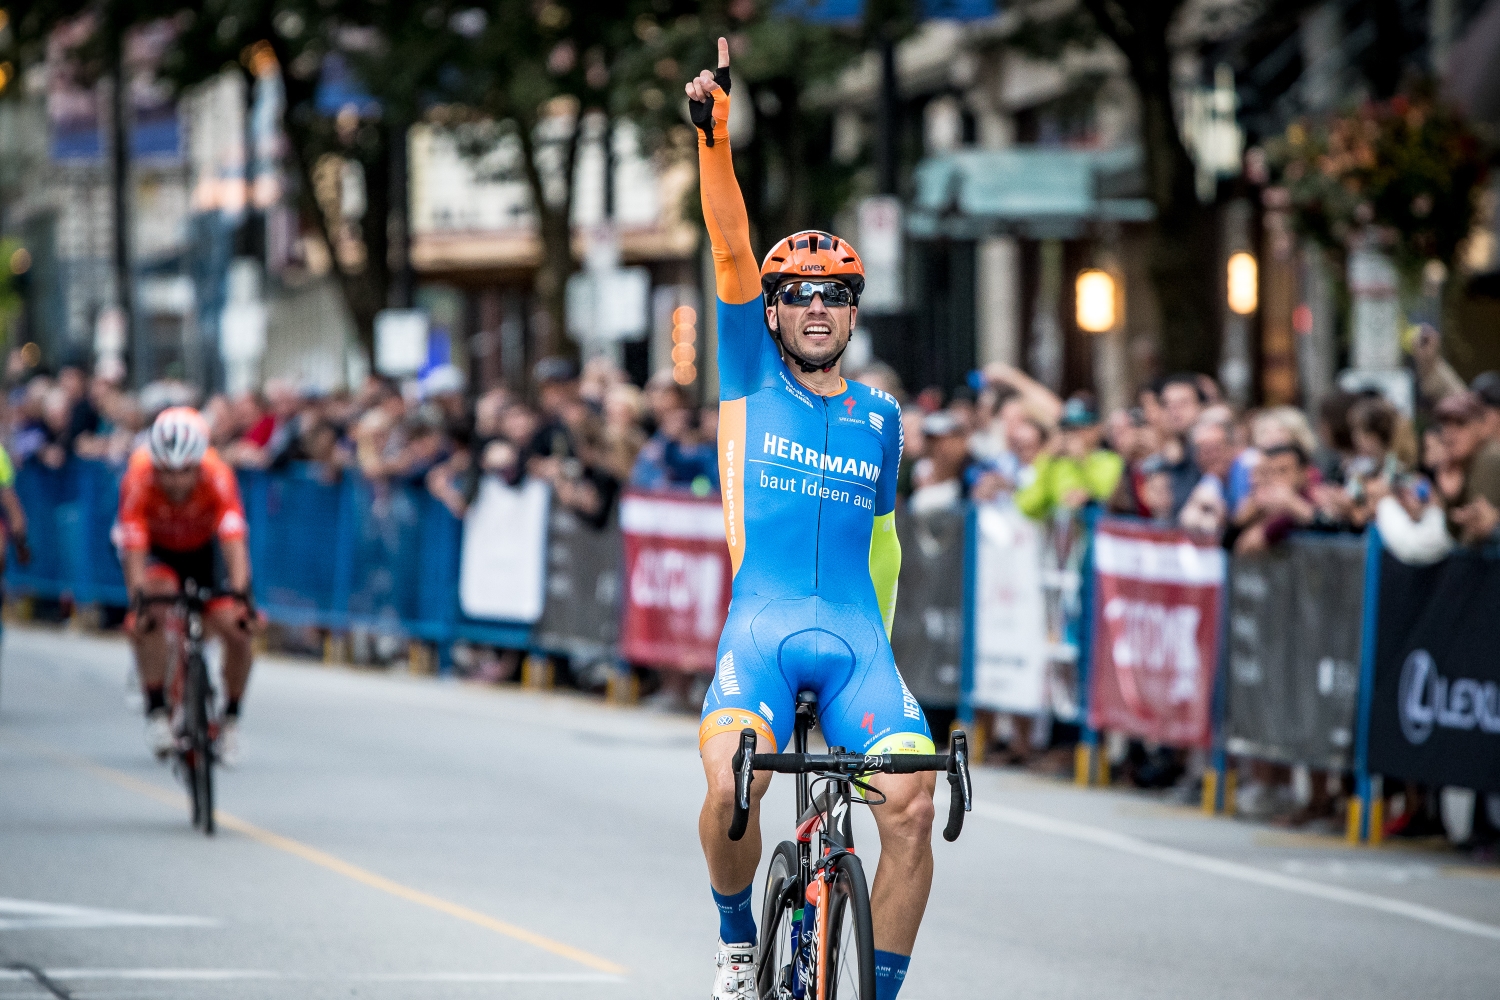 Florenz Knauer Aims for Third Straight Win at NEW WEST GRAND PRIX